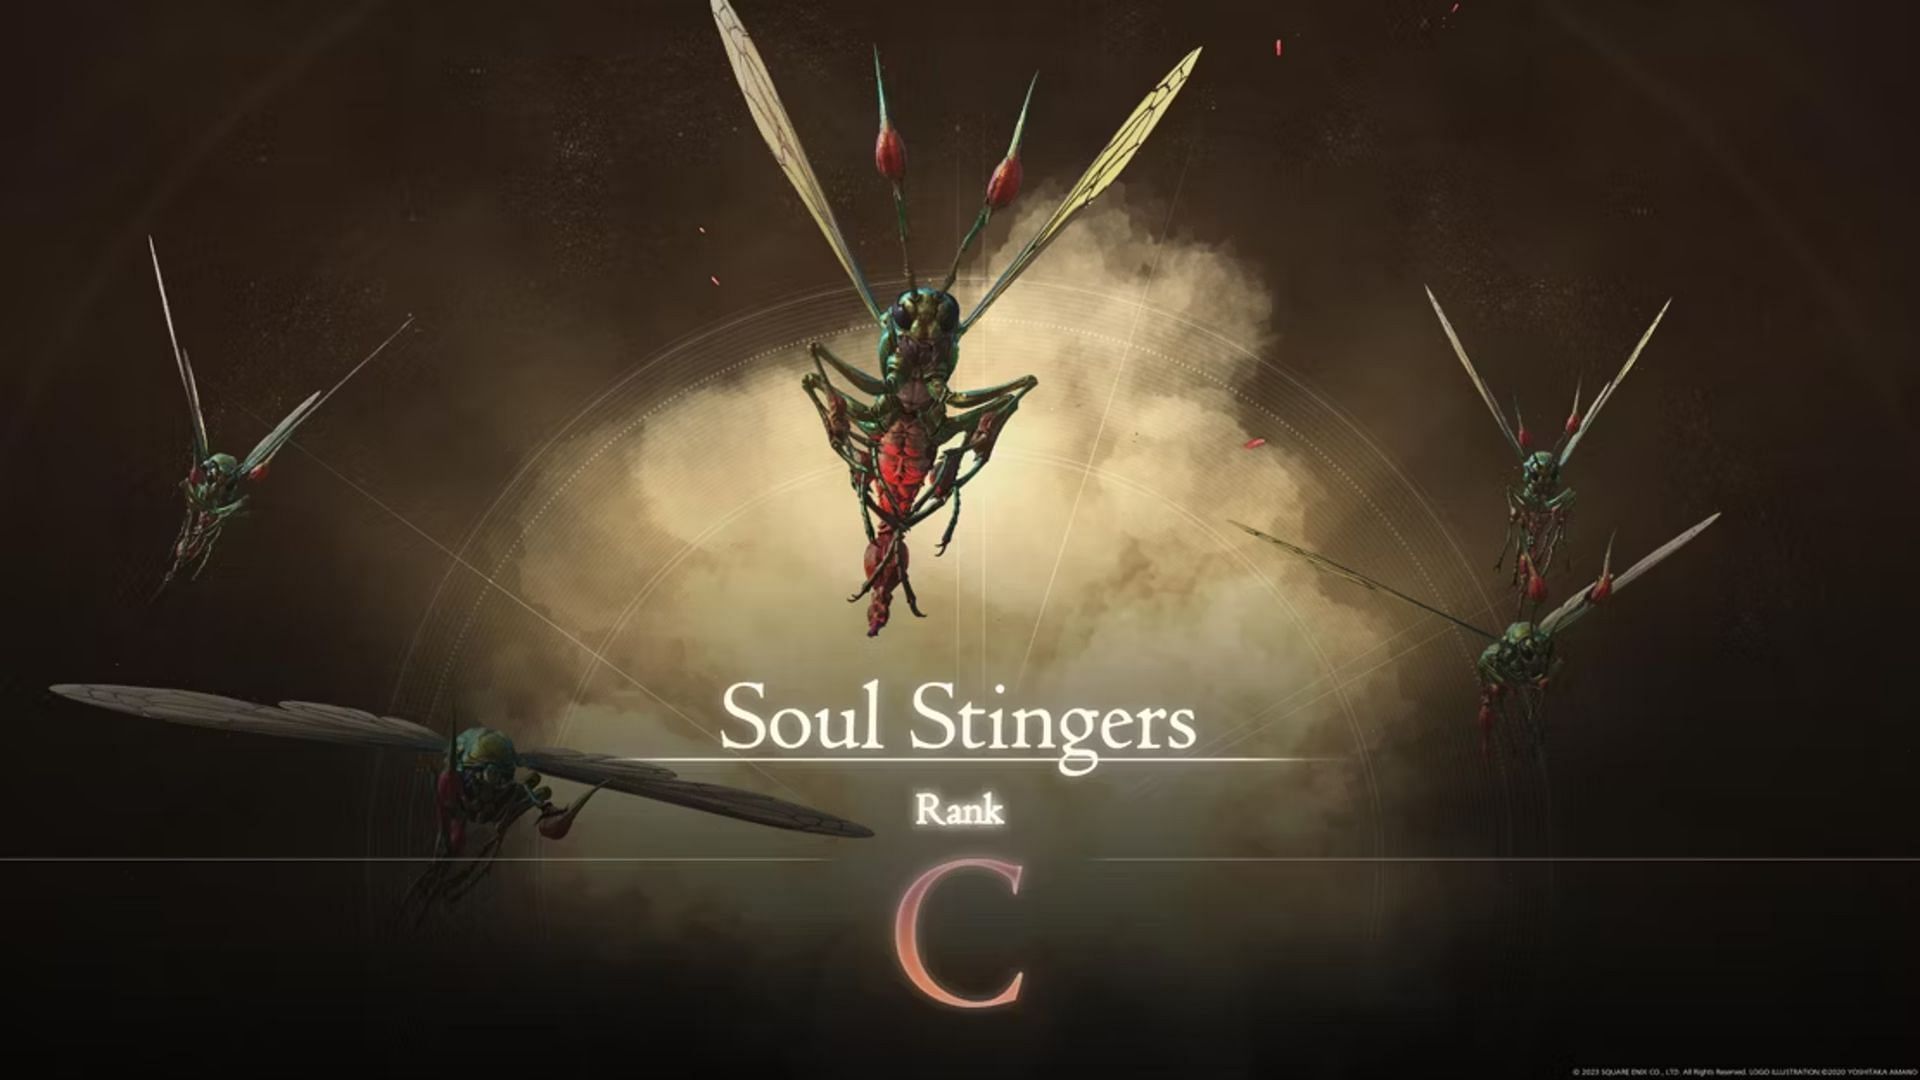 An image of the Soul Stingers in the game